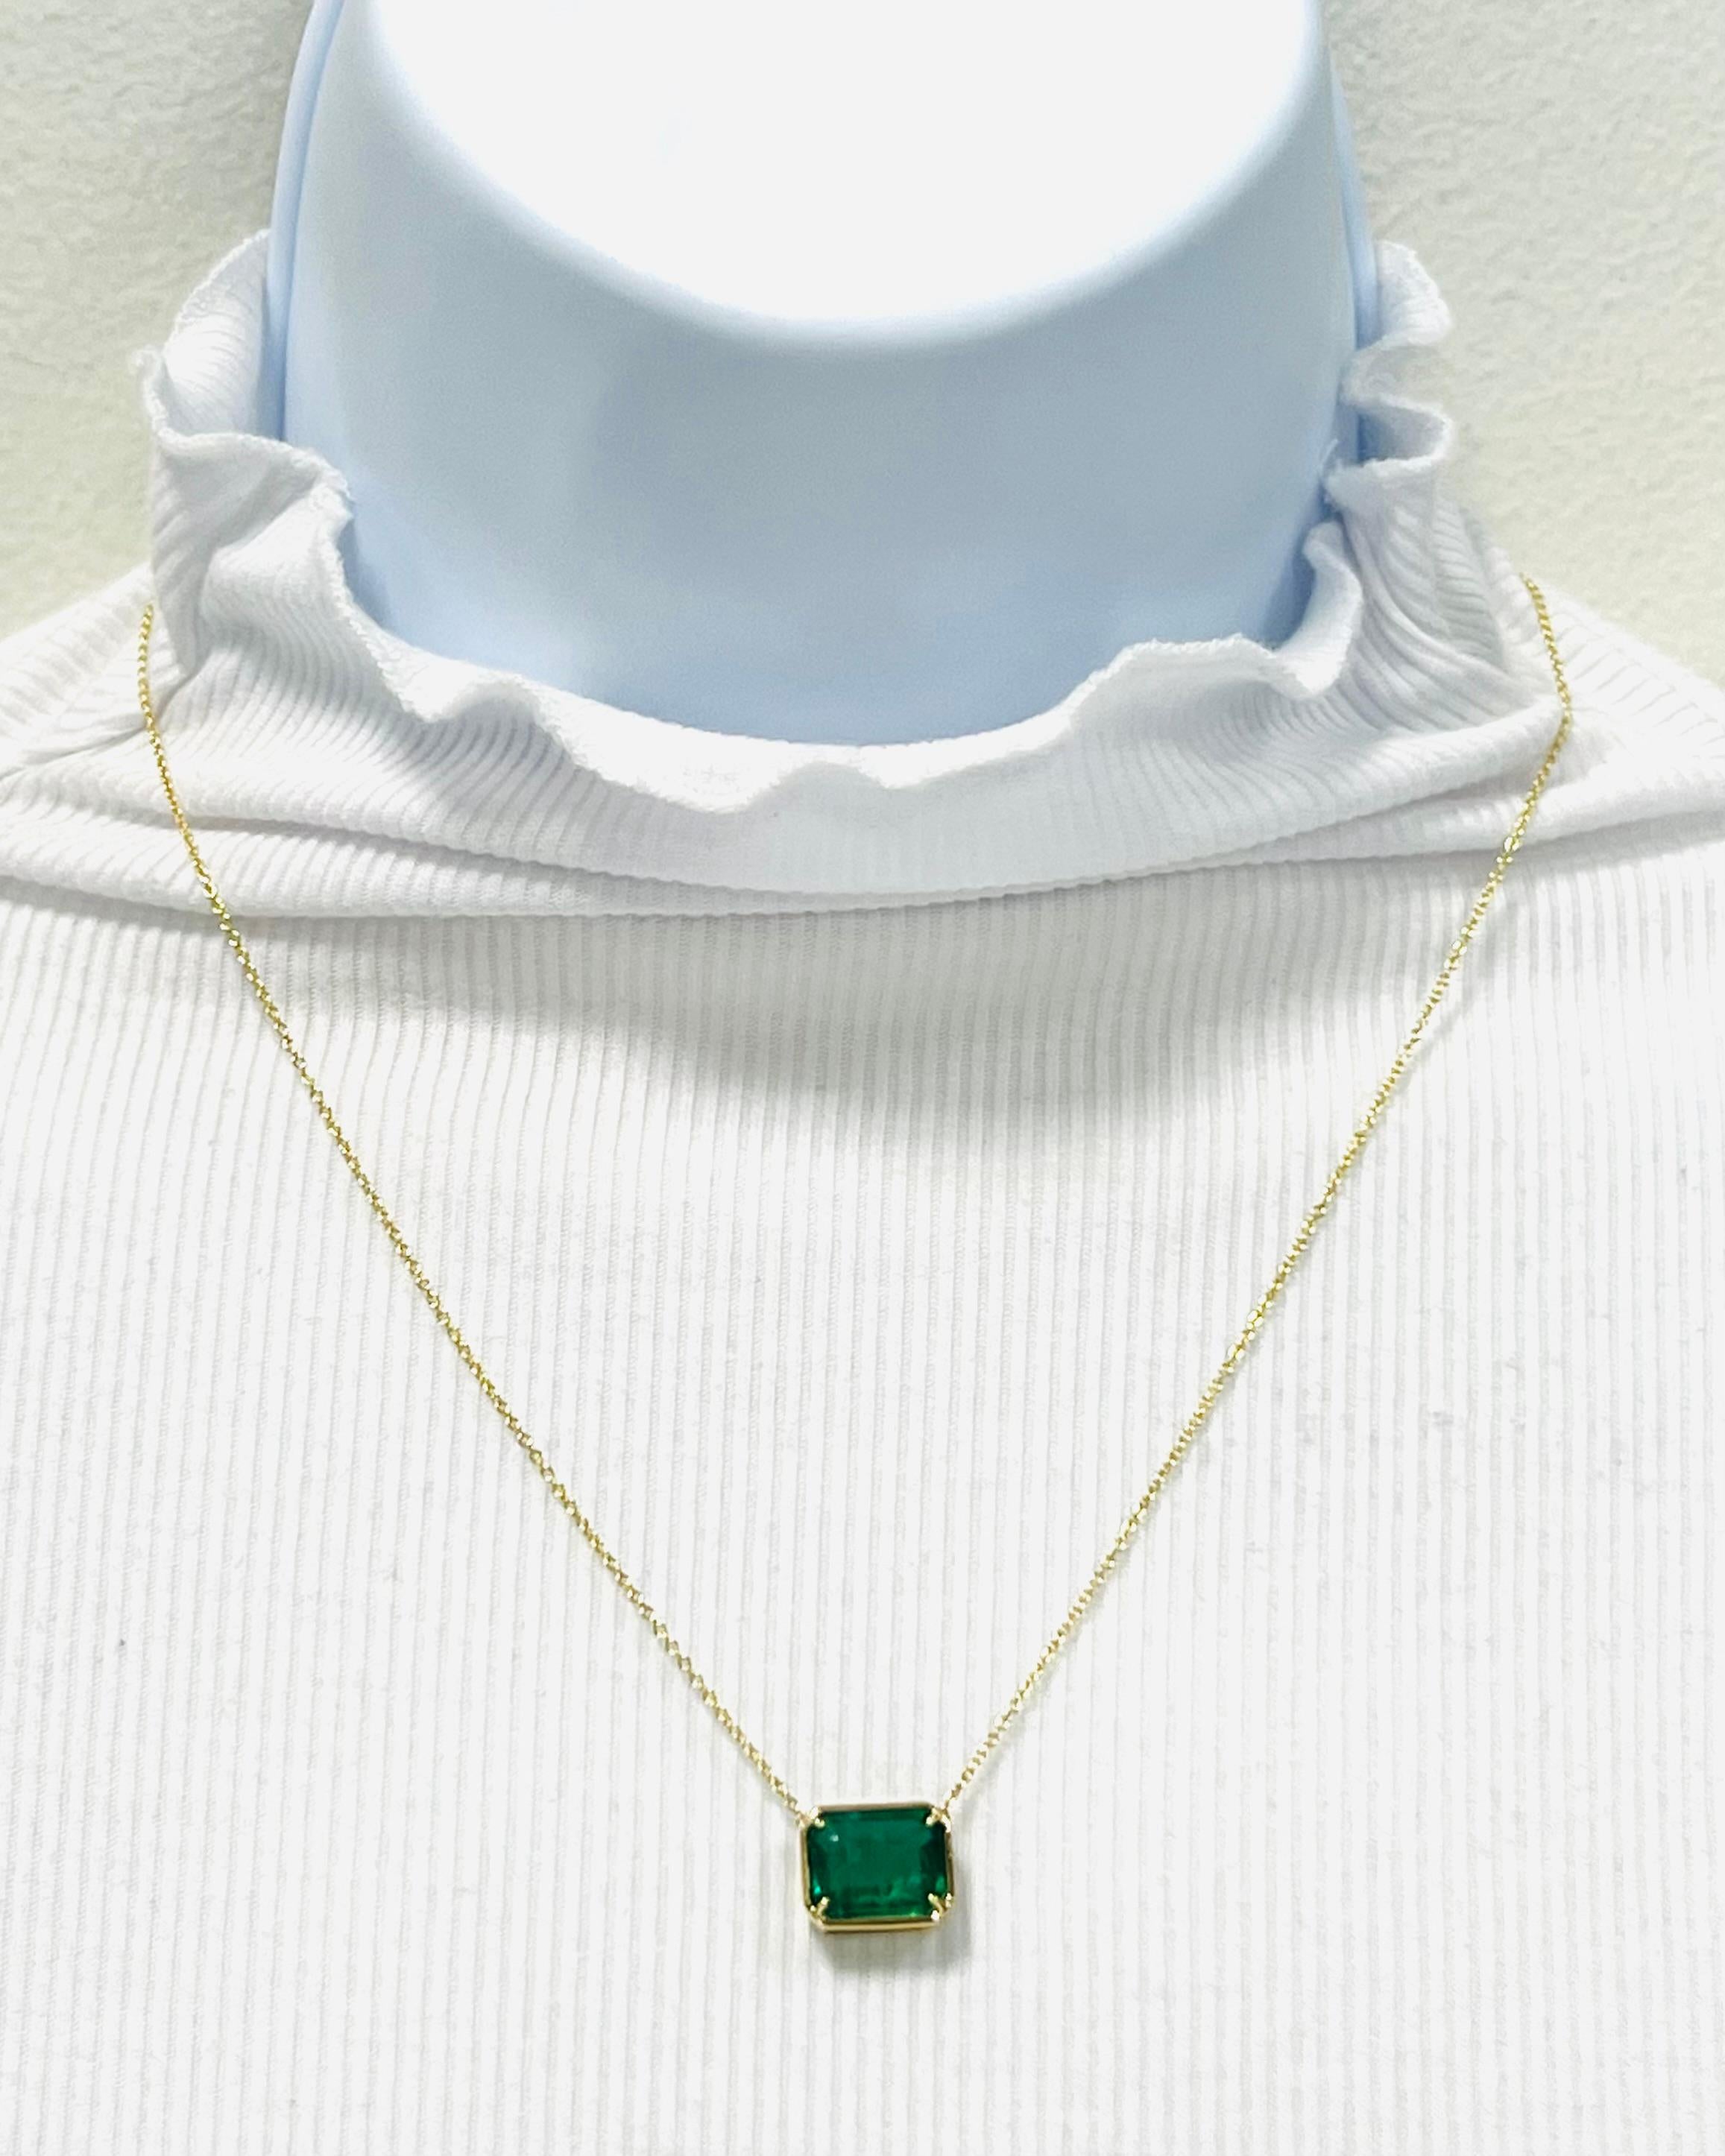 Beautiful 3.31 ct. emerald emerald cut in a 18k yellow gold mounting.  The bezel and prong look is fun and trend forward.  Length is 18